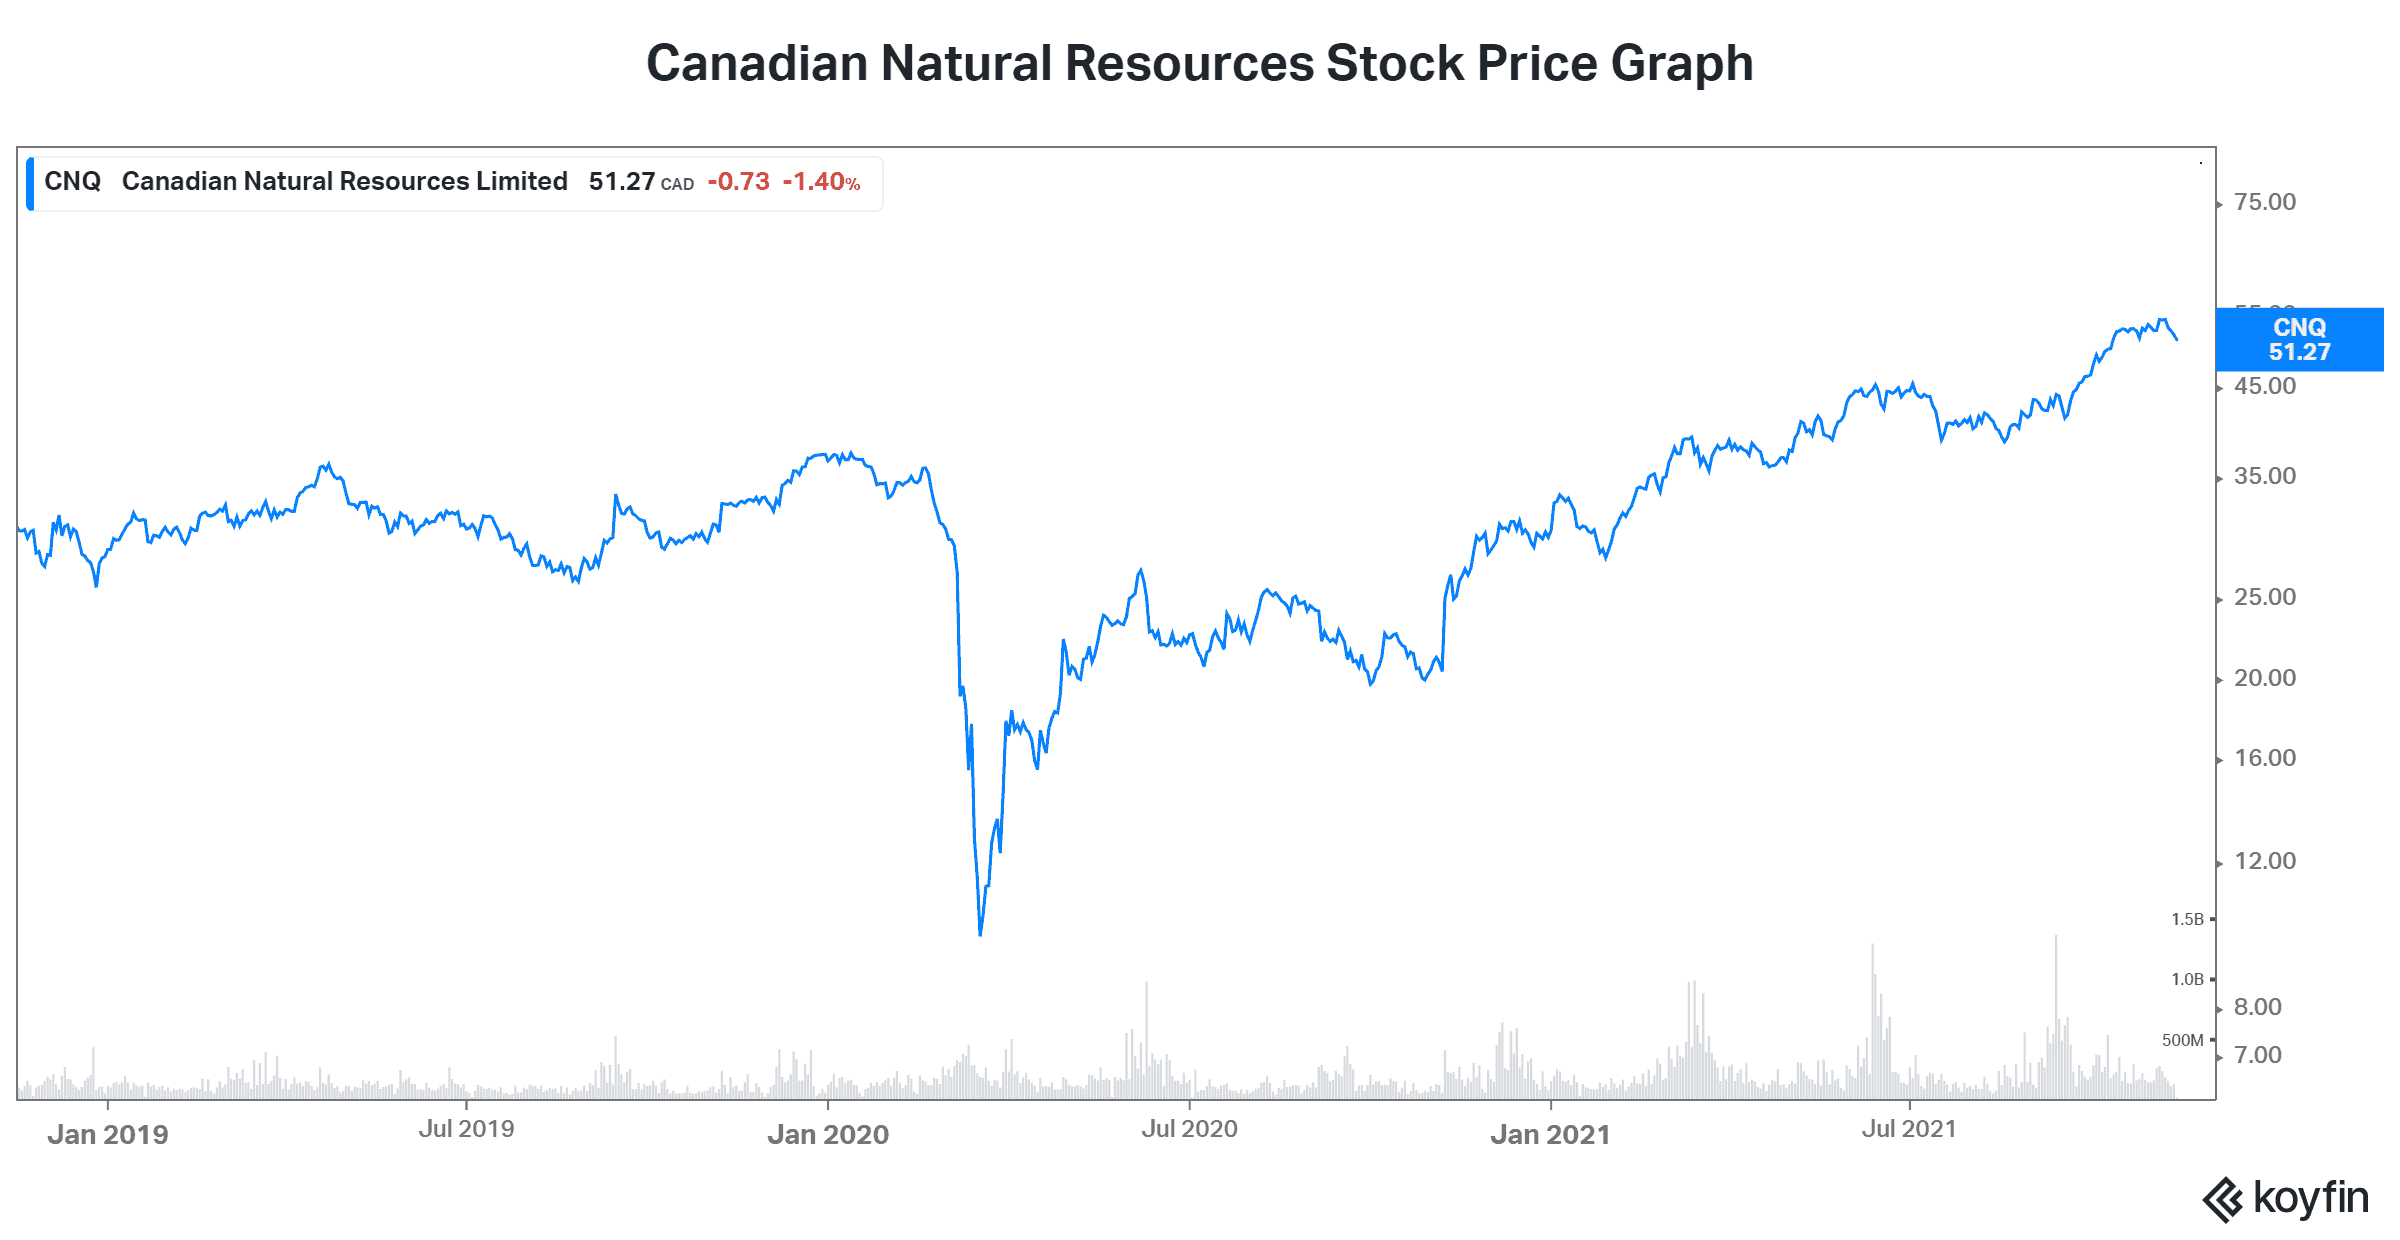 Dividend stock Canadian Natural Resources stock